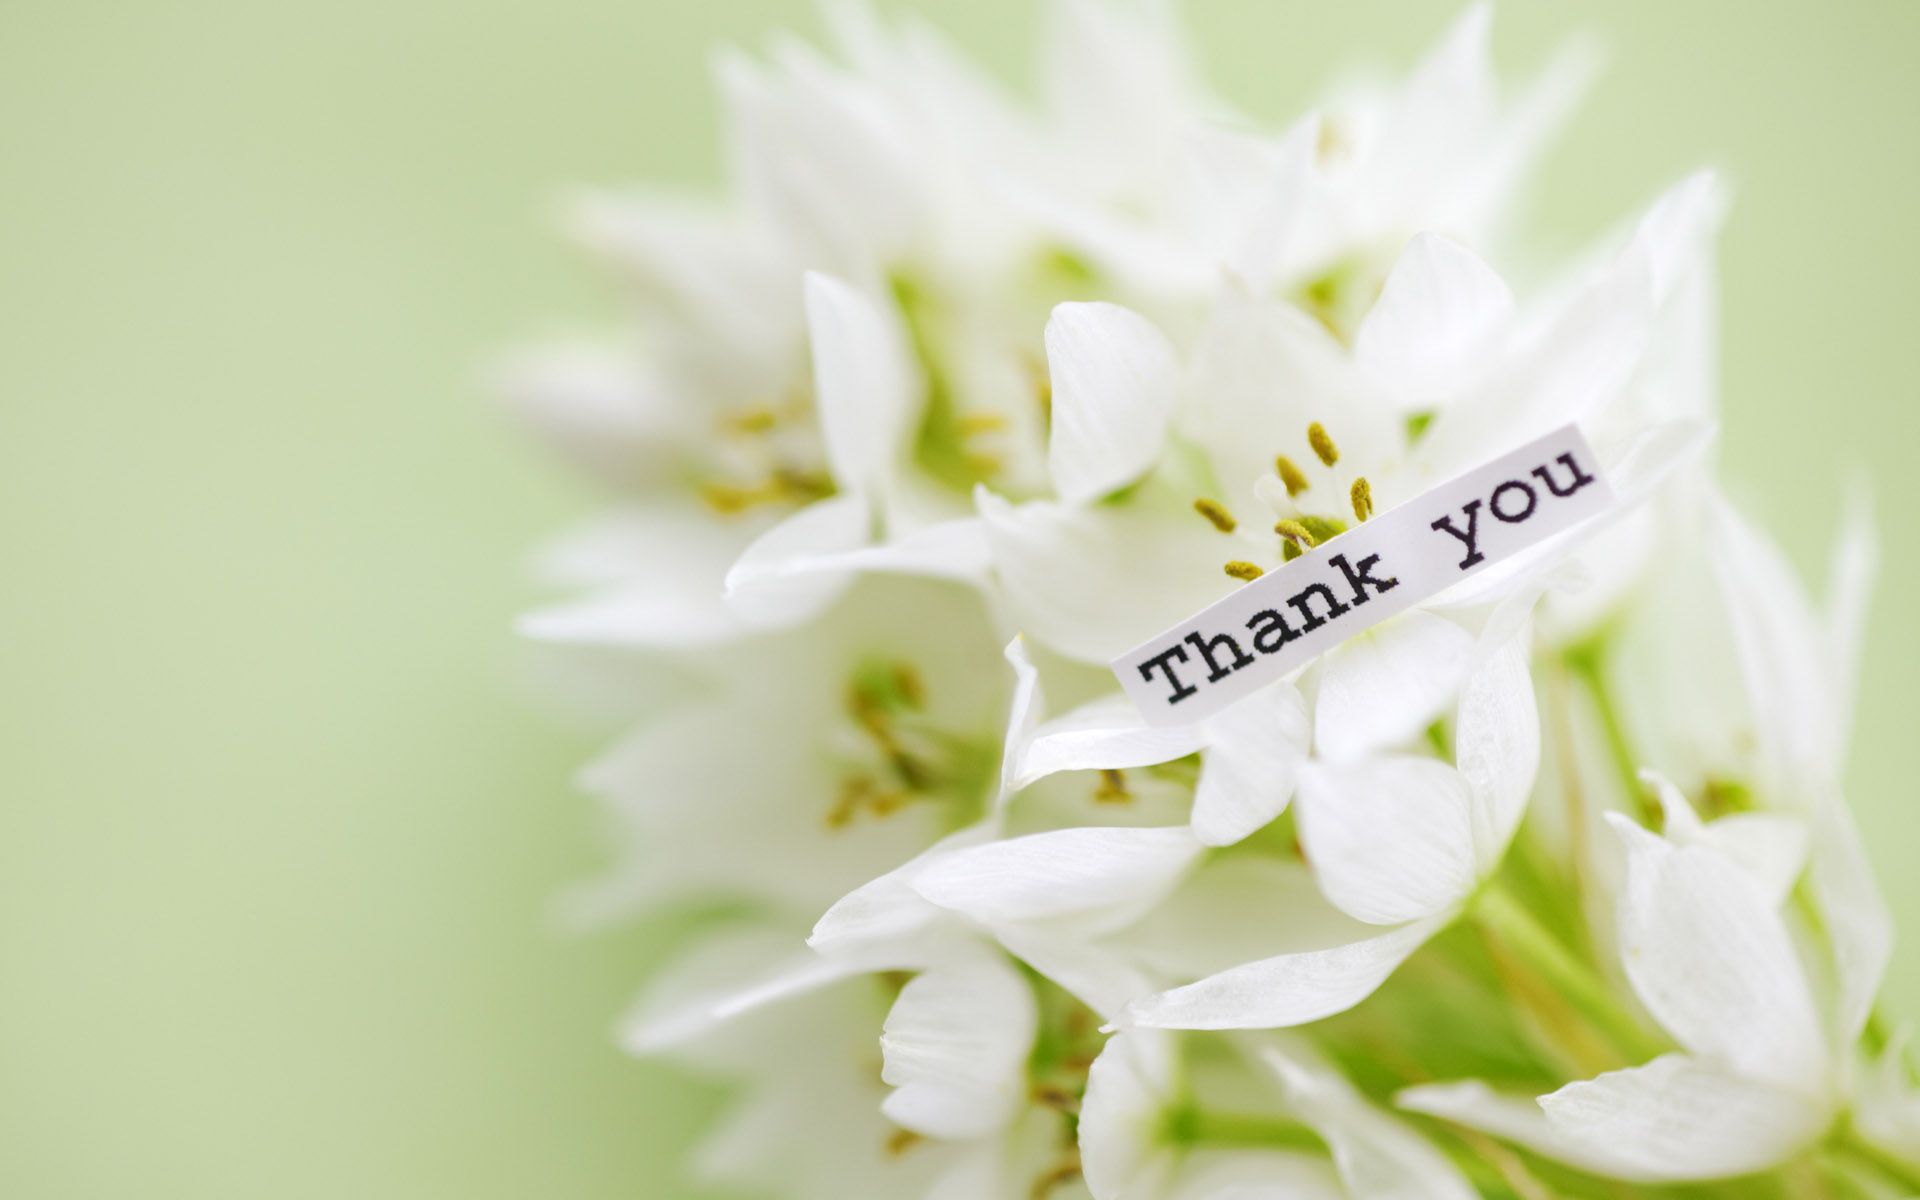 New Thank You for desktop hd wallpapers | Wallpapers Wide Free